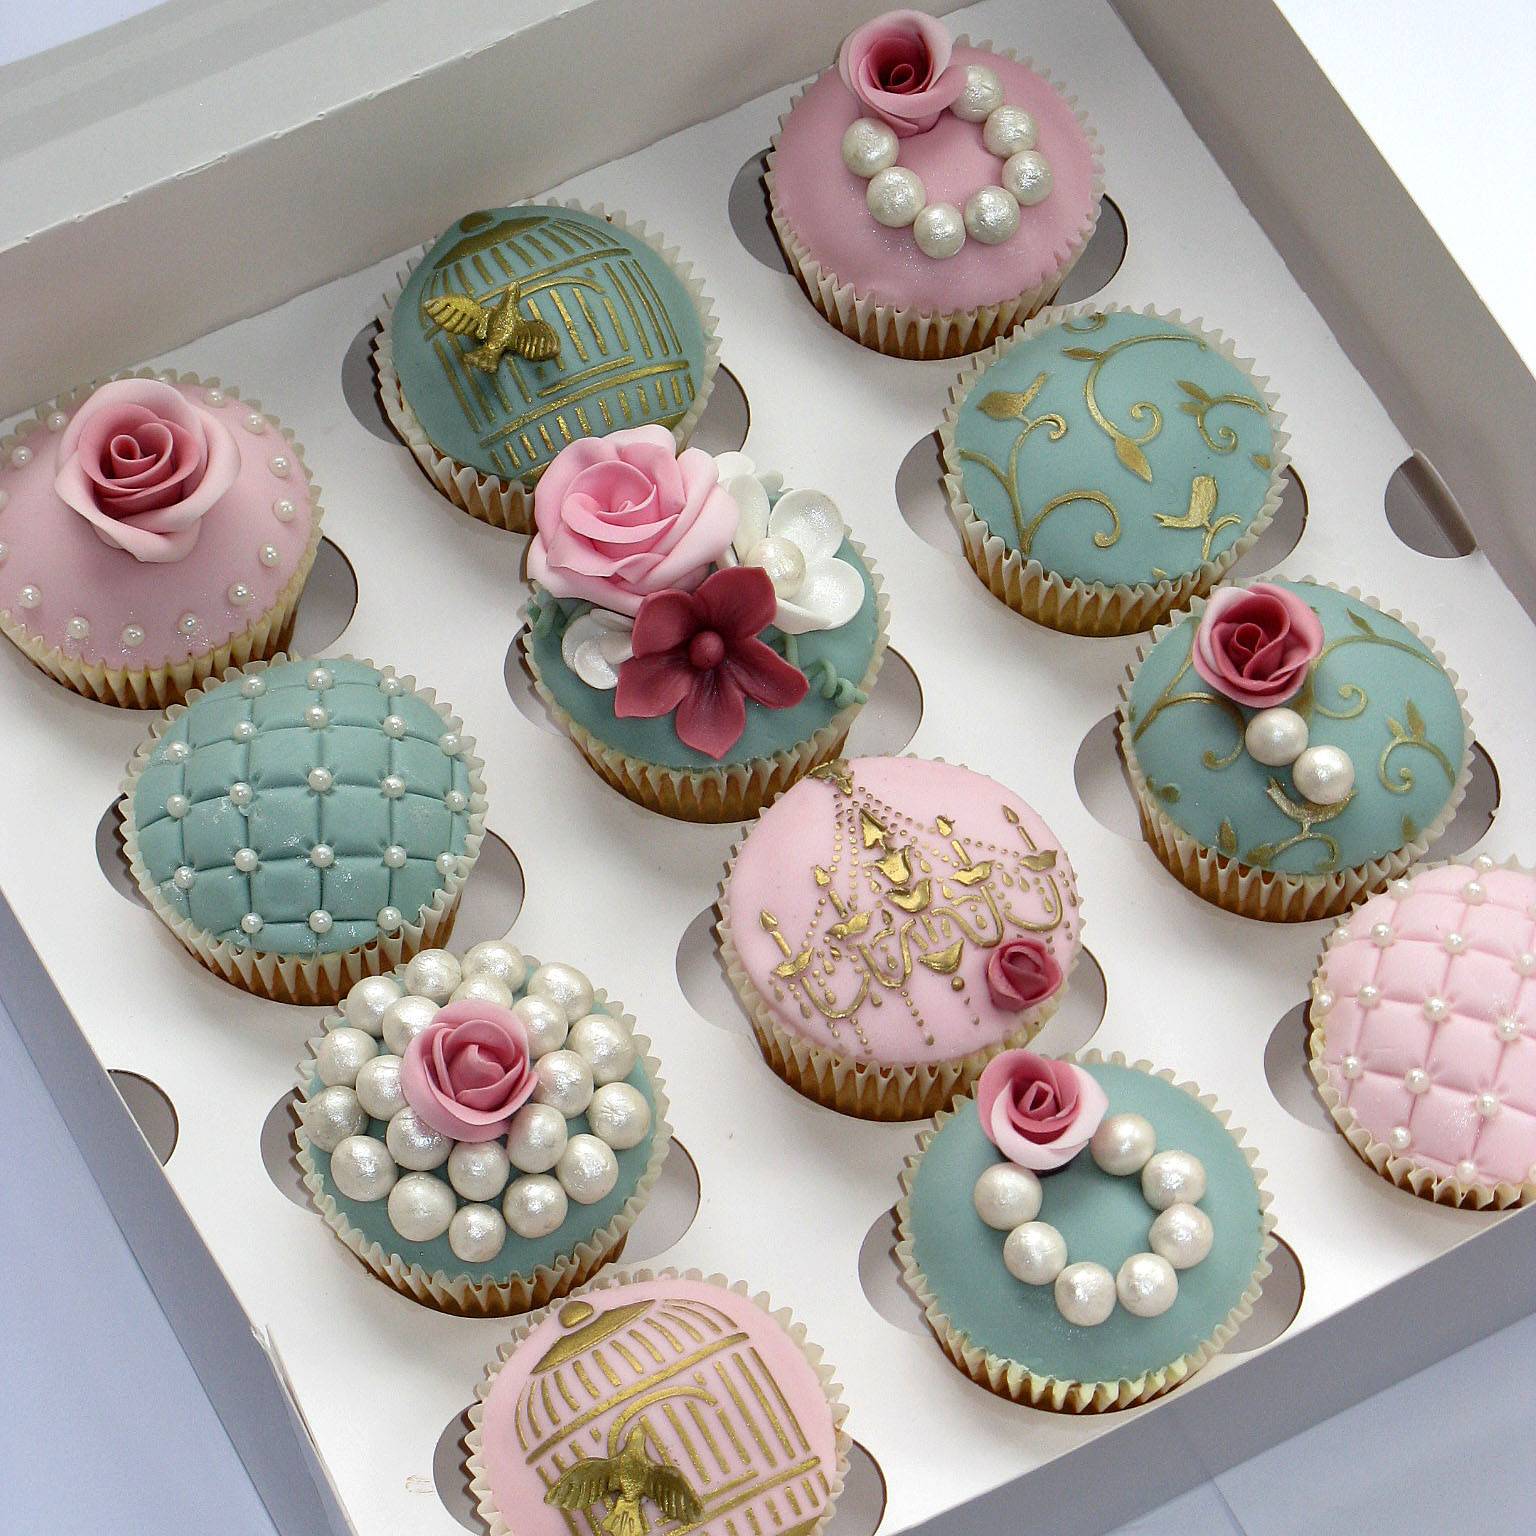 7 Photos of Cupcakes With Jewels